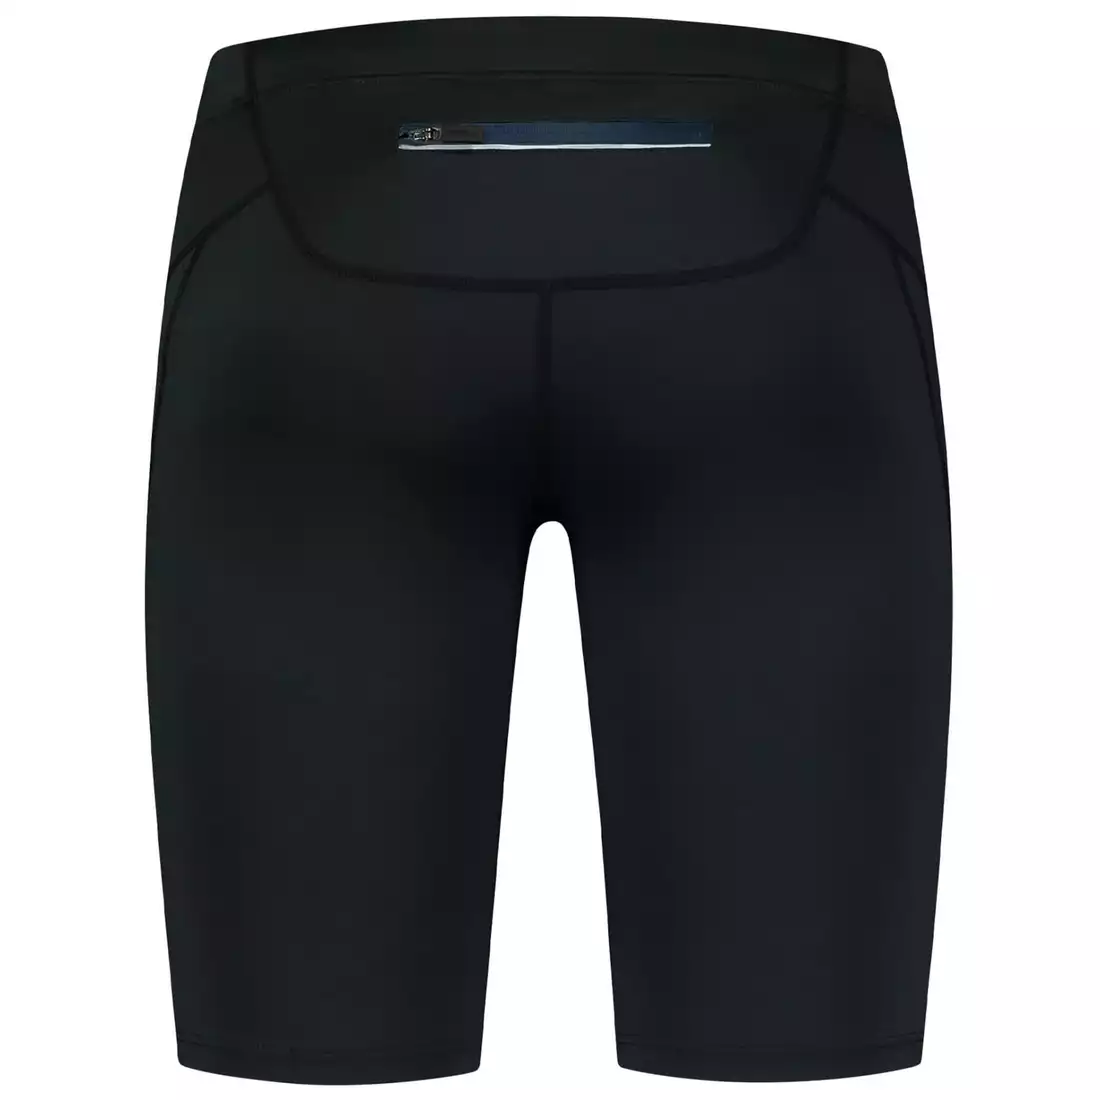 Rogelli CORE men's running shorts, black and blue